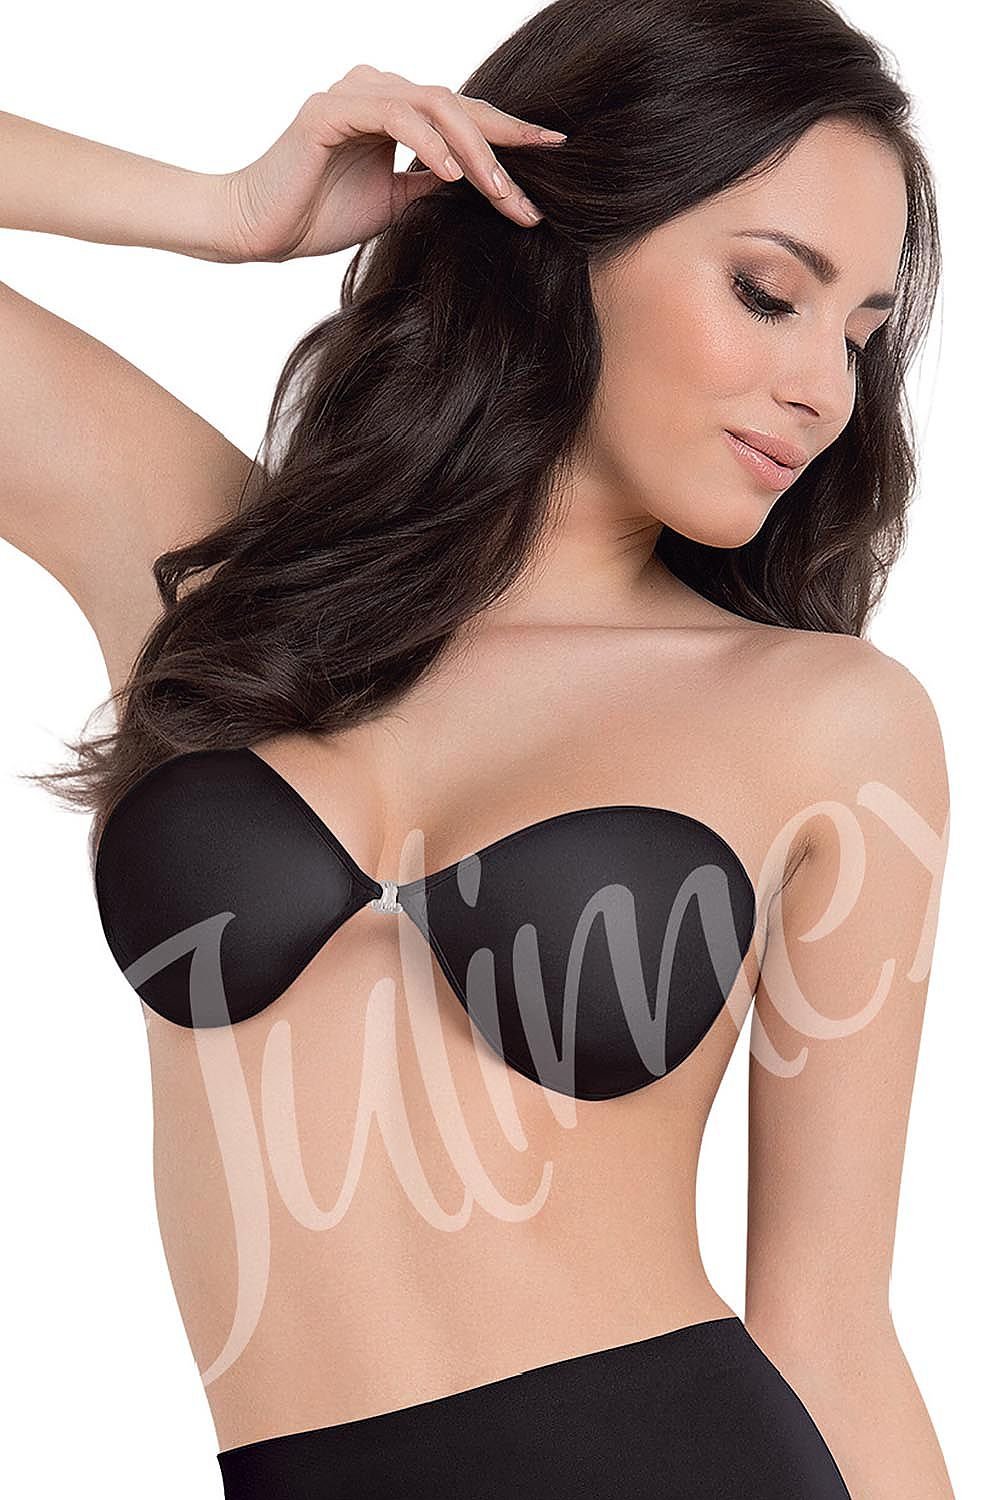 Strapless Bras - Available As Bandeaus & Stick On Bras